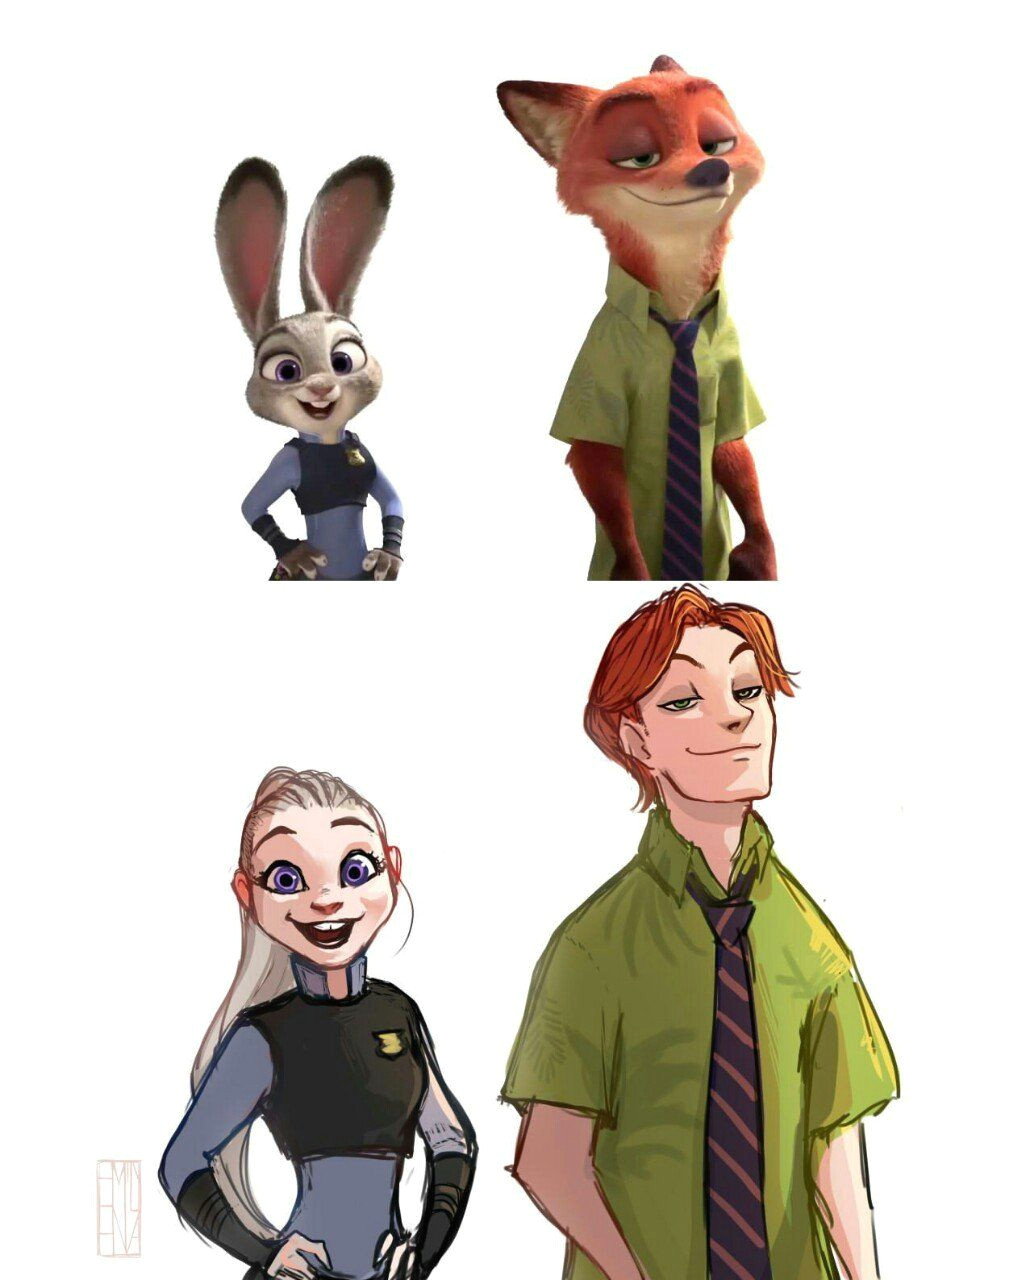 Drawing Zootopia Characters One Of the Best Versions I Ve Seen the Facial Features are Mimicked